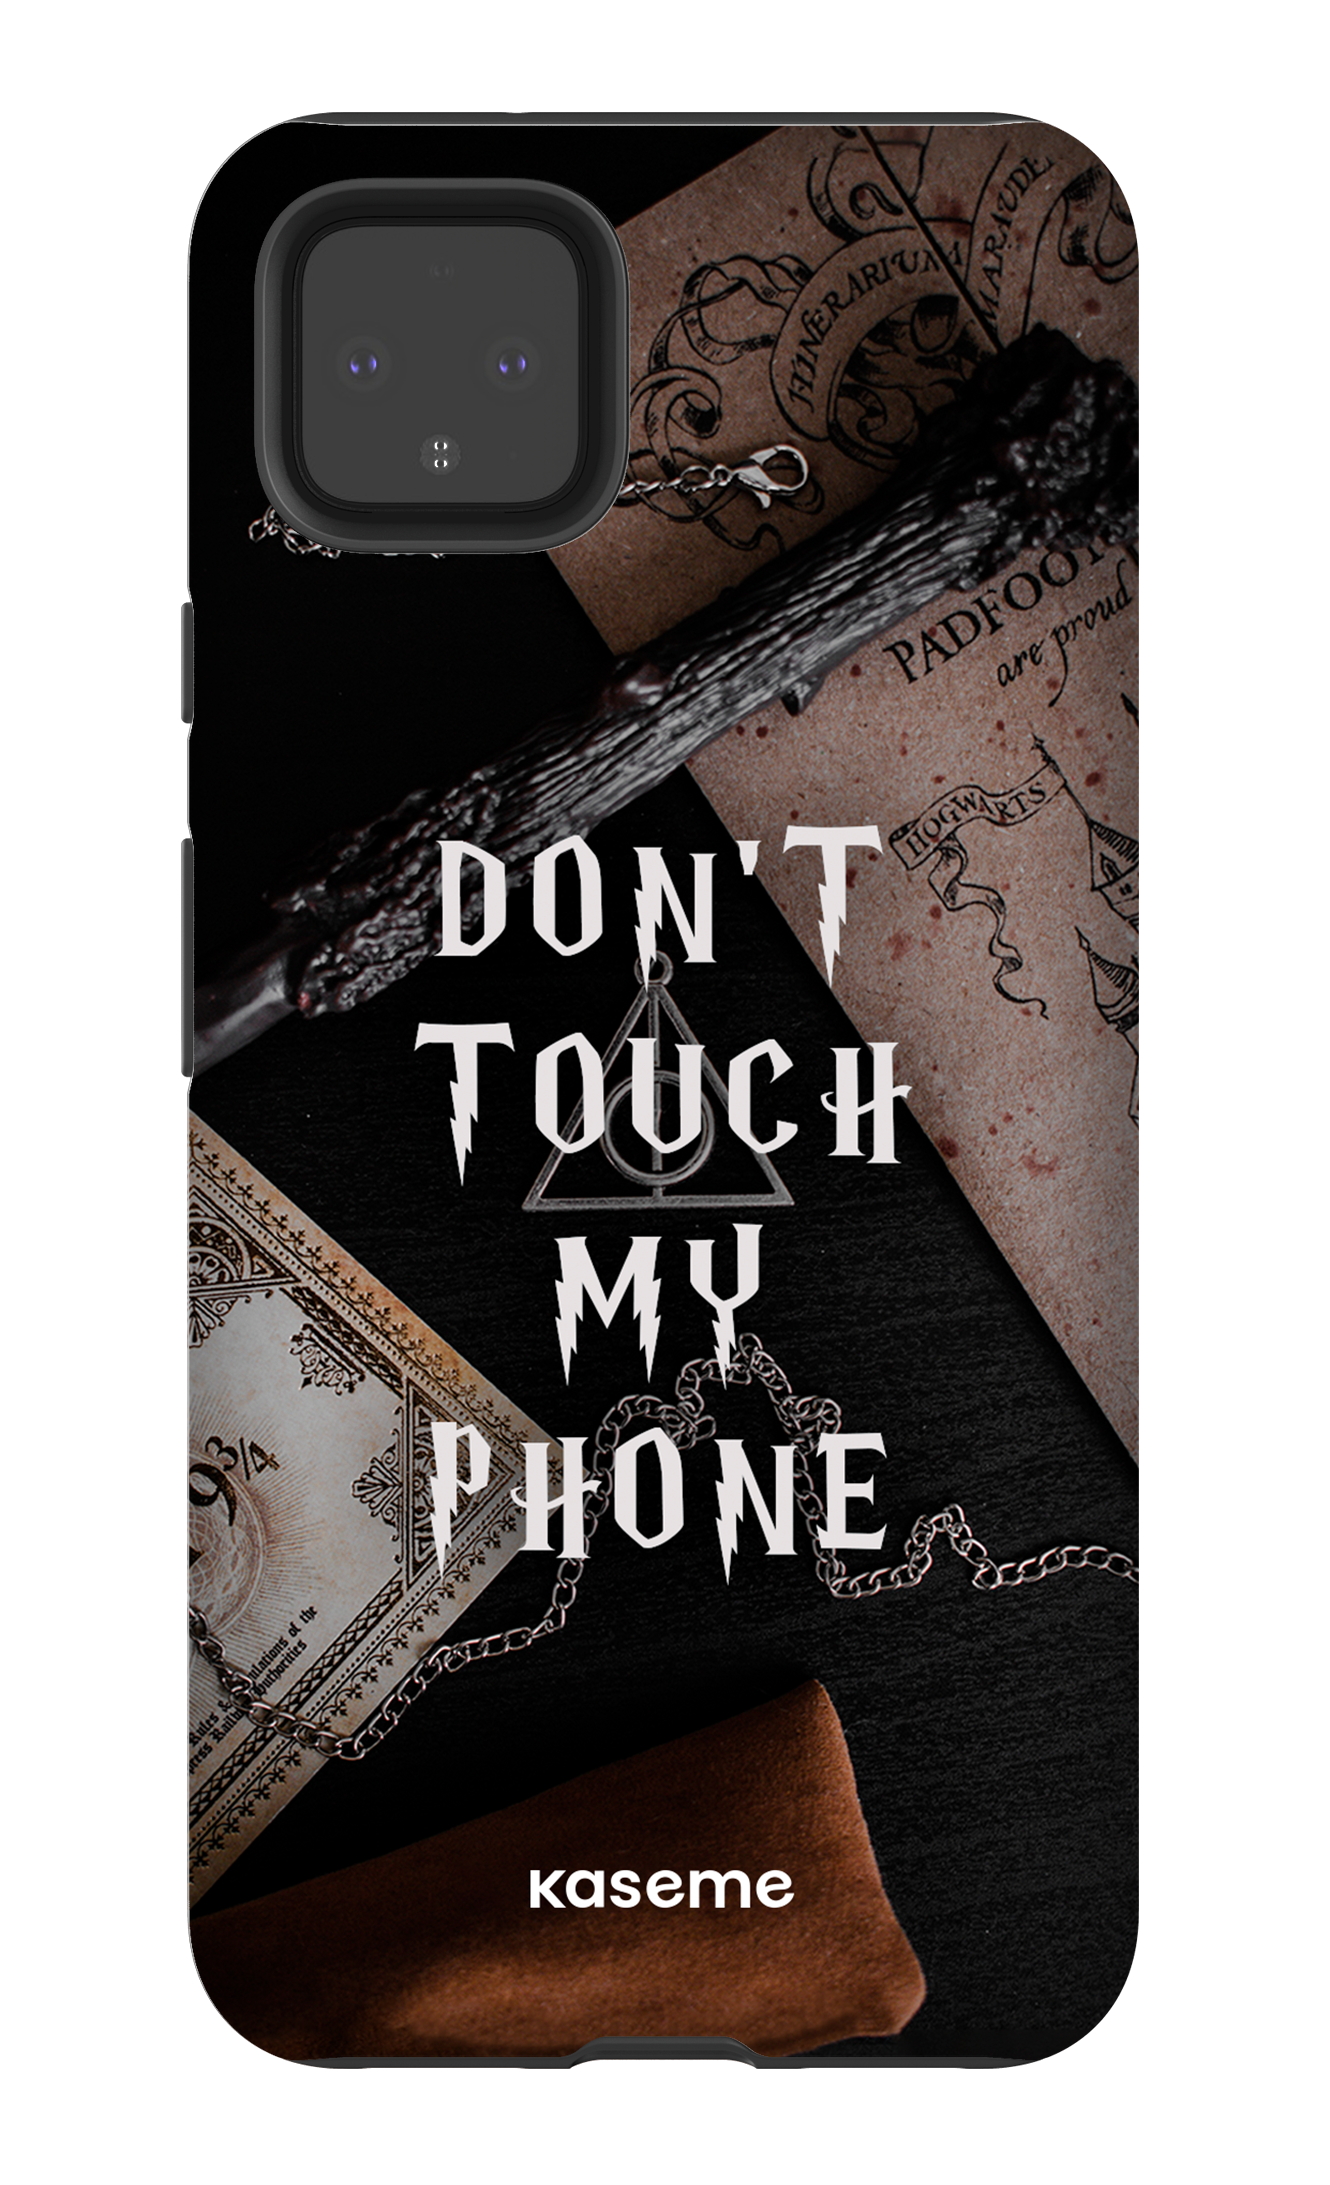 Don't Touch My Phone - Google Pixel 4 XL